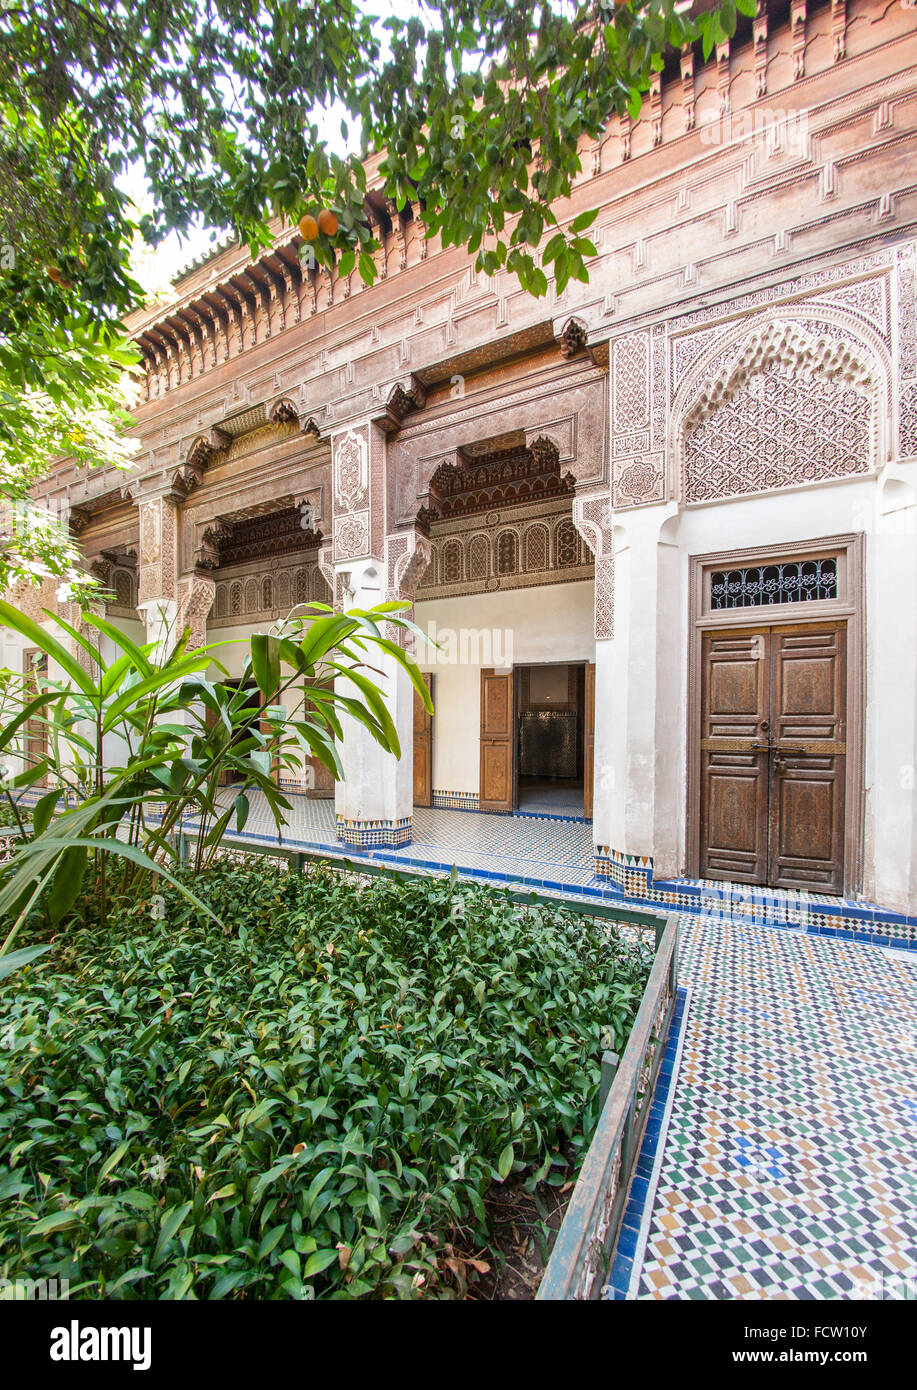 Courtyard of the Bahia Palace in Marrakech, Morocco. Stock Photo